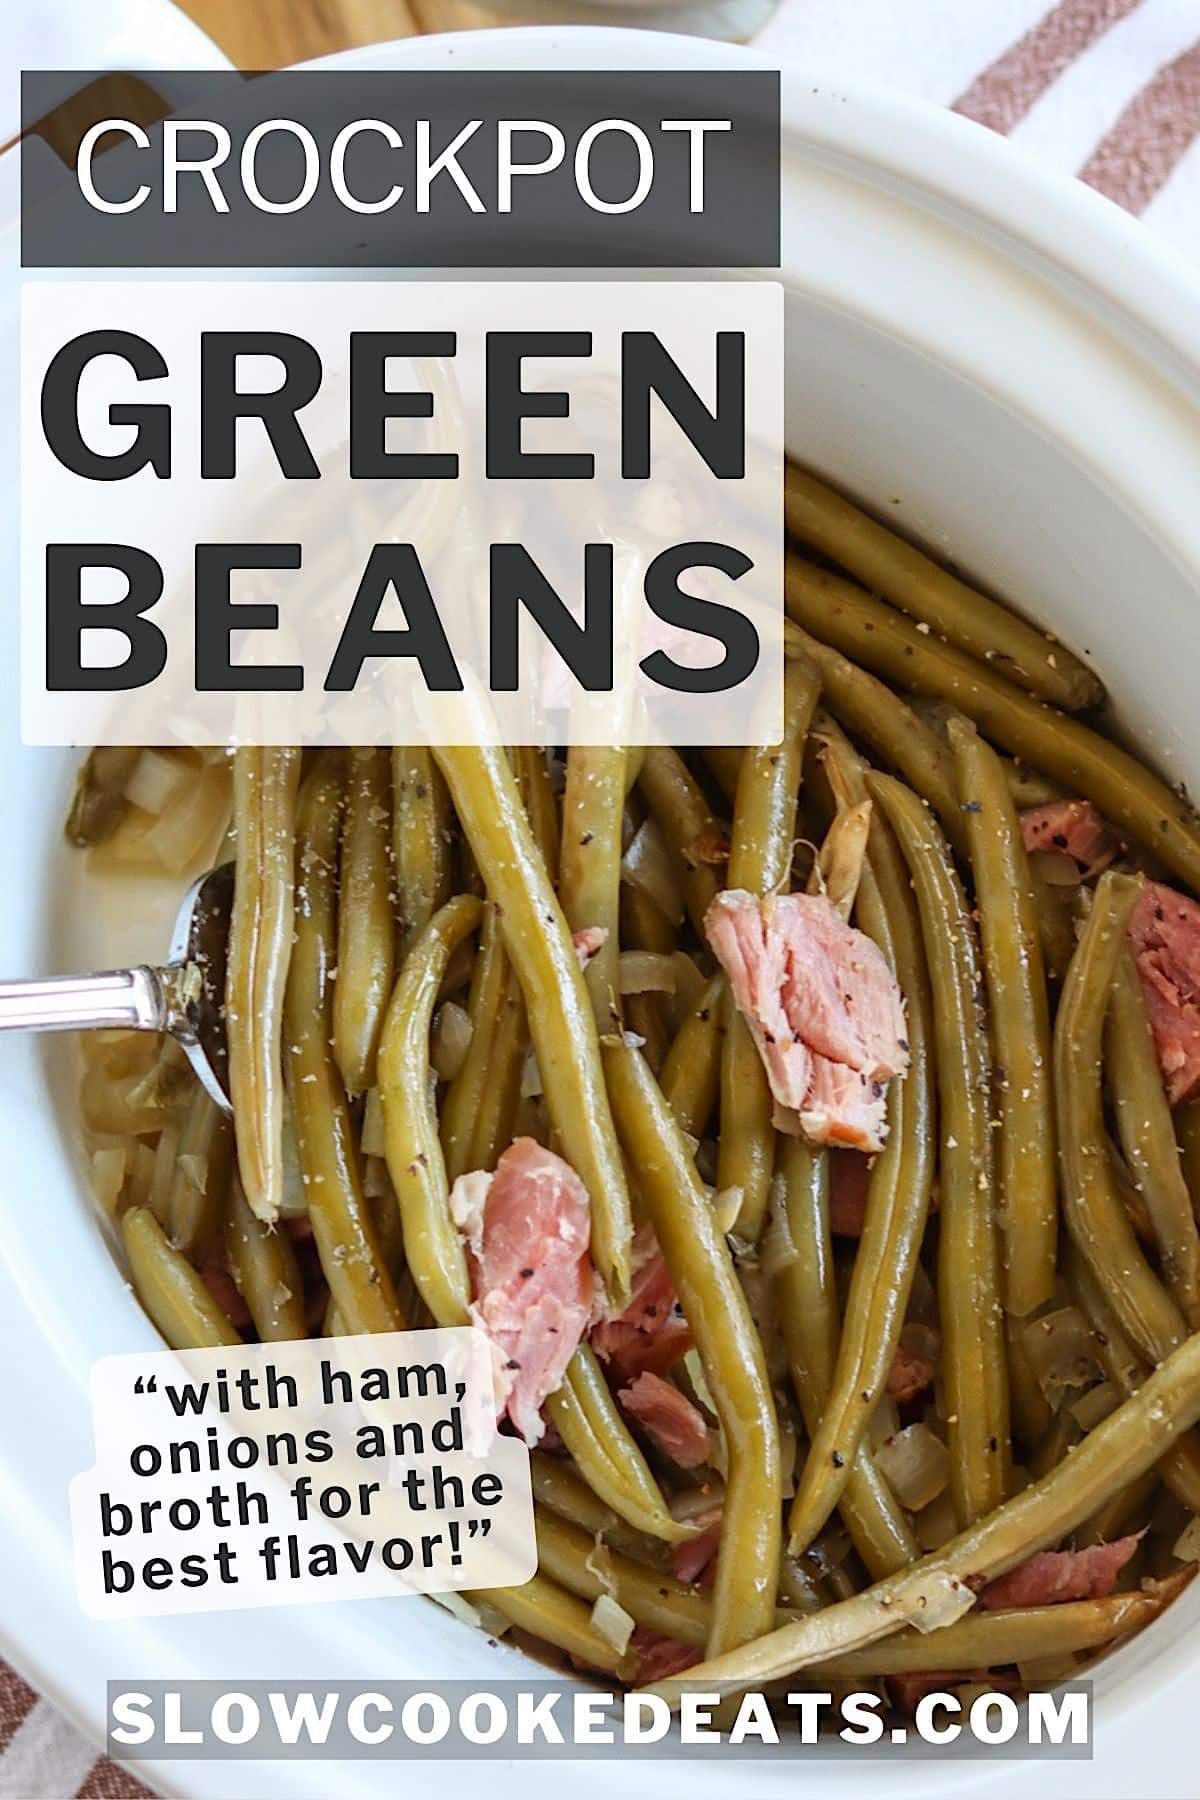 Slow cooker green beans with ham and onions in a white crock pot.